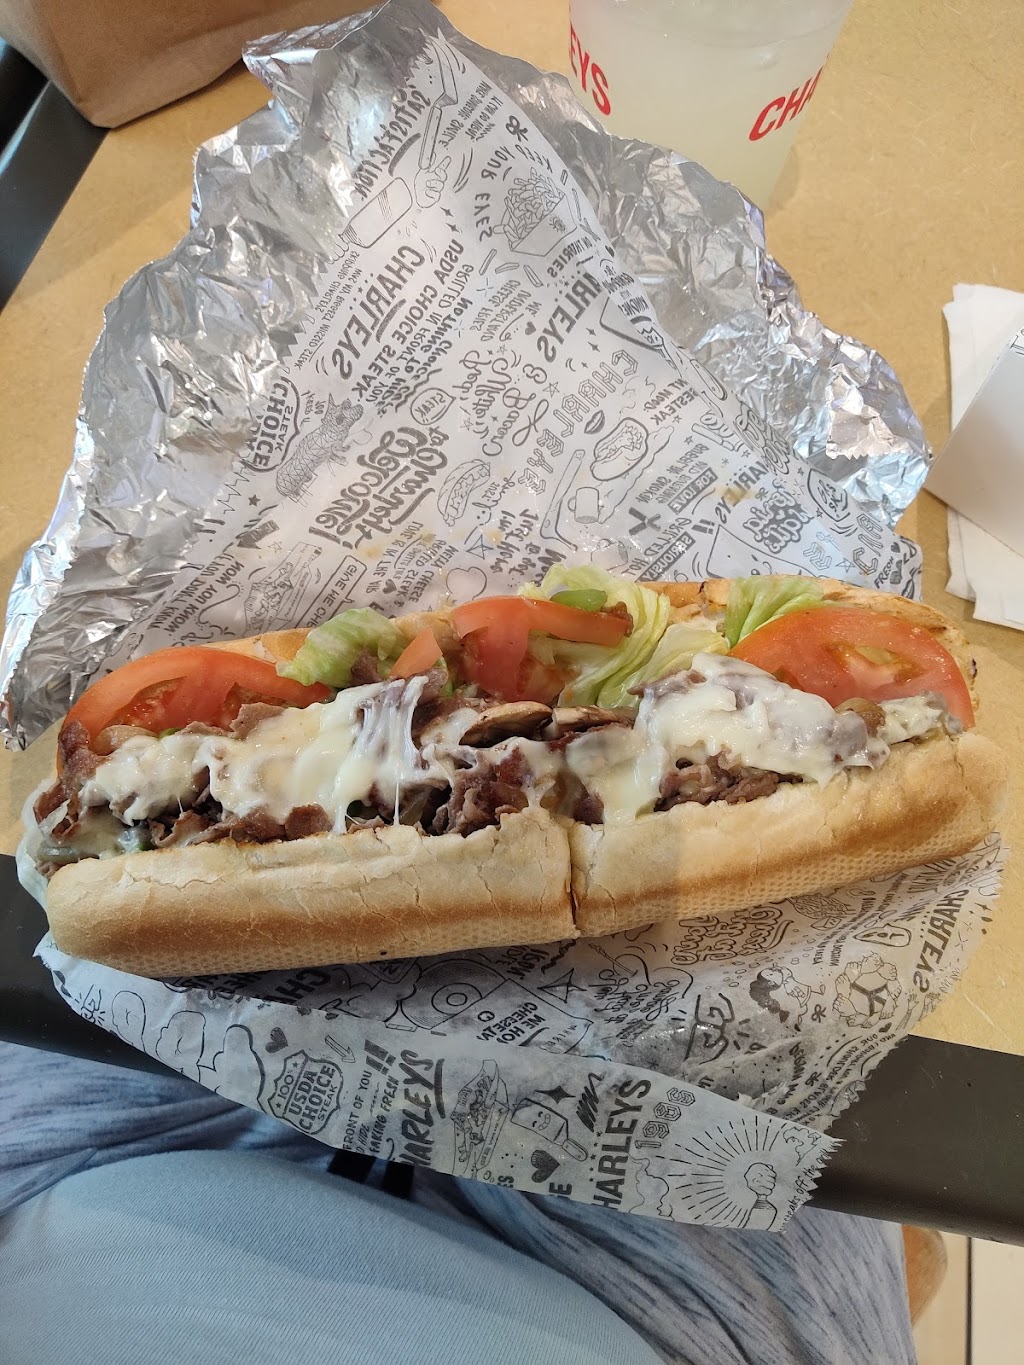 Charleys Cheesesteaks | 308 Montgomery Mall F007, North Wales, PA 19454 | Phone: (215) 647-3168